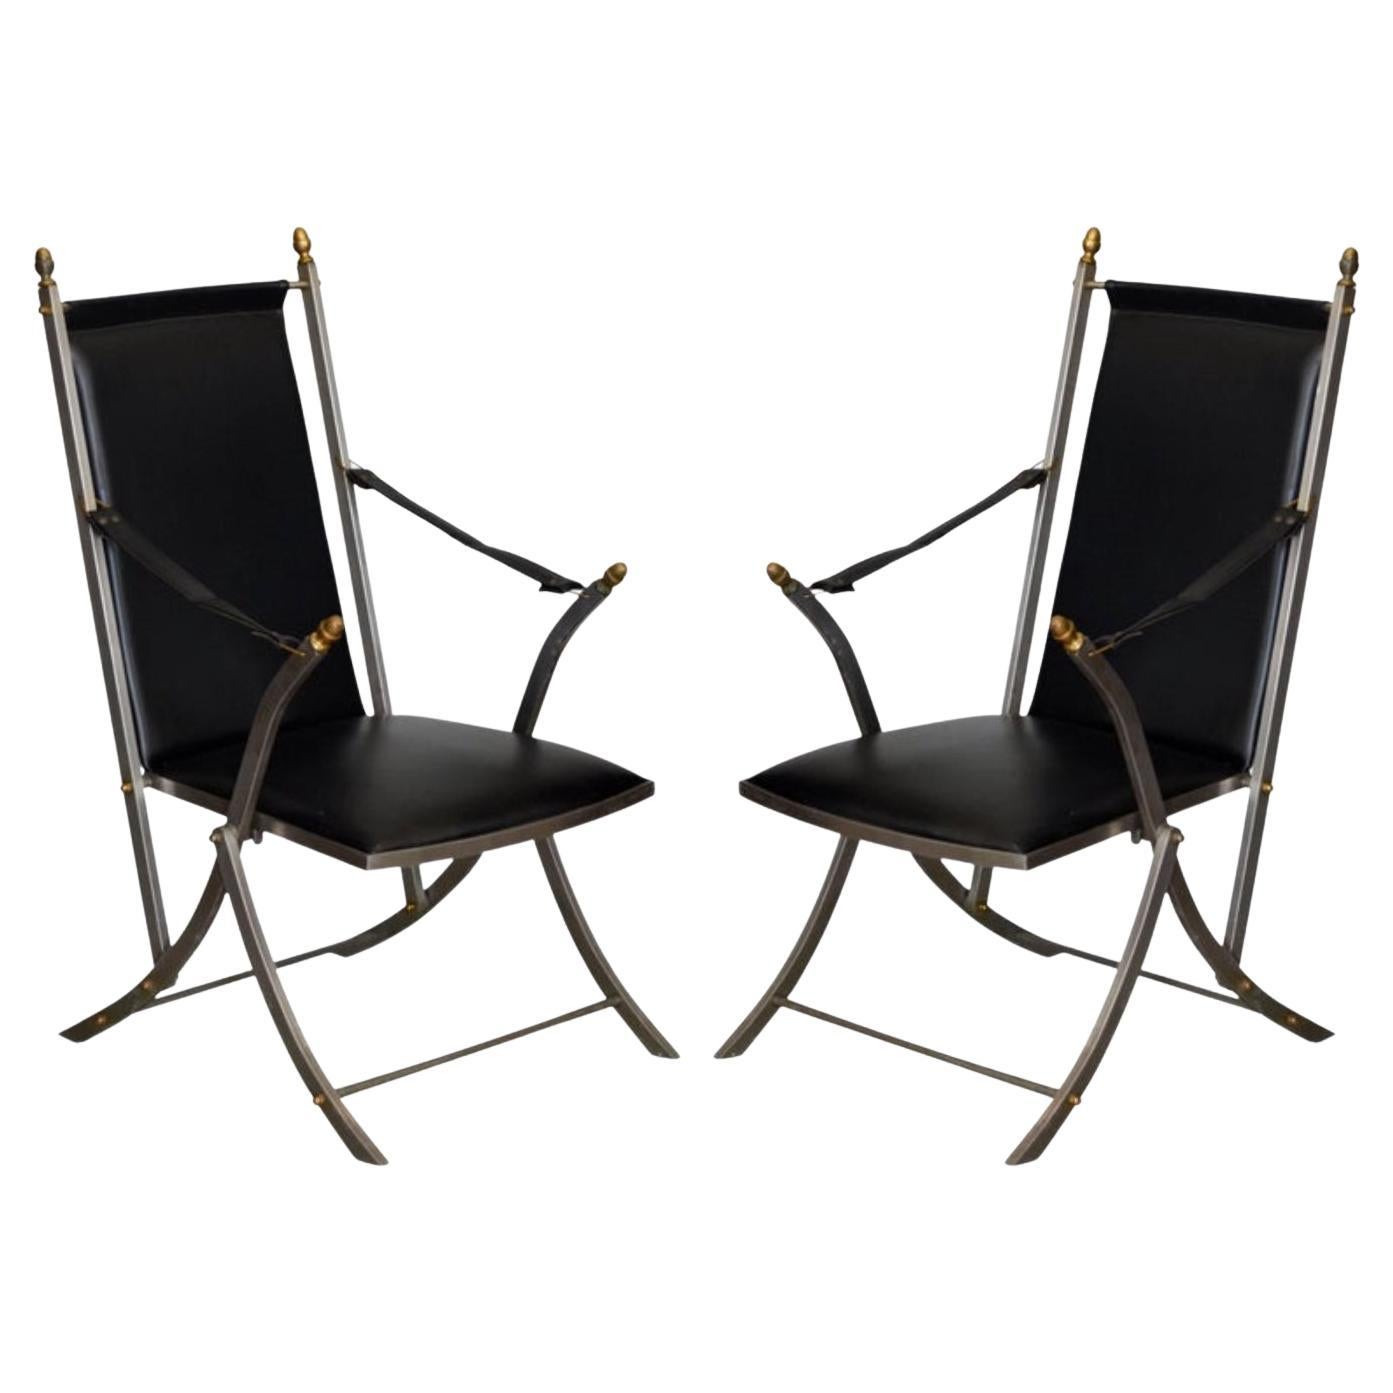 Pair of Chic Folding Campaign Armchairs in the Style of Maison Jansen